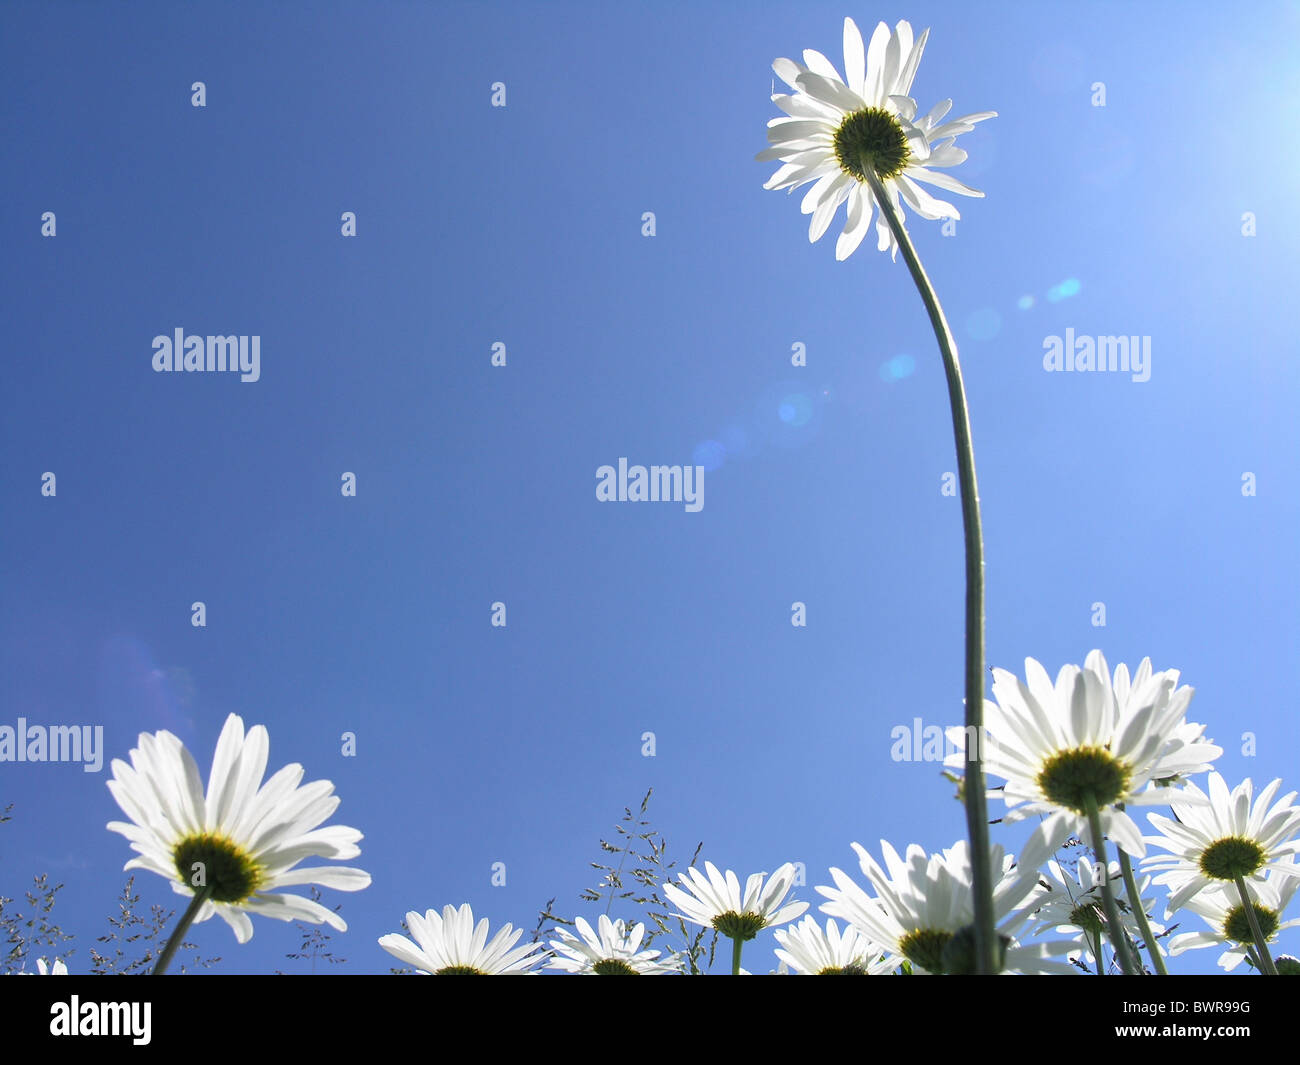 Oxeye daisies marguerite flowers bloom blooming flower blue sky meadow close-up detail Stock Photo